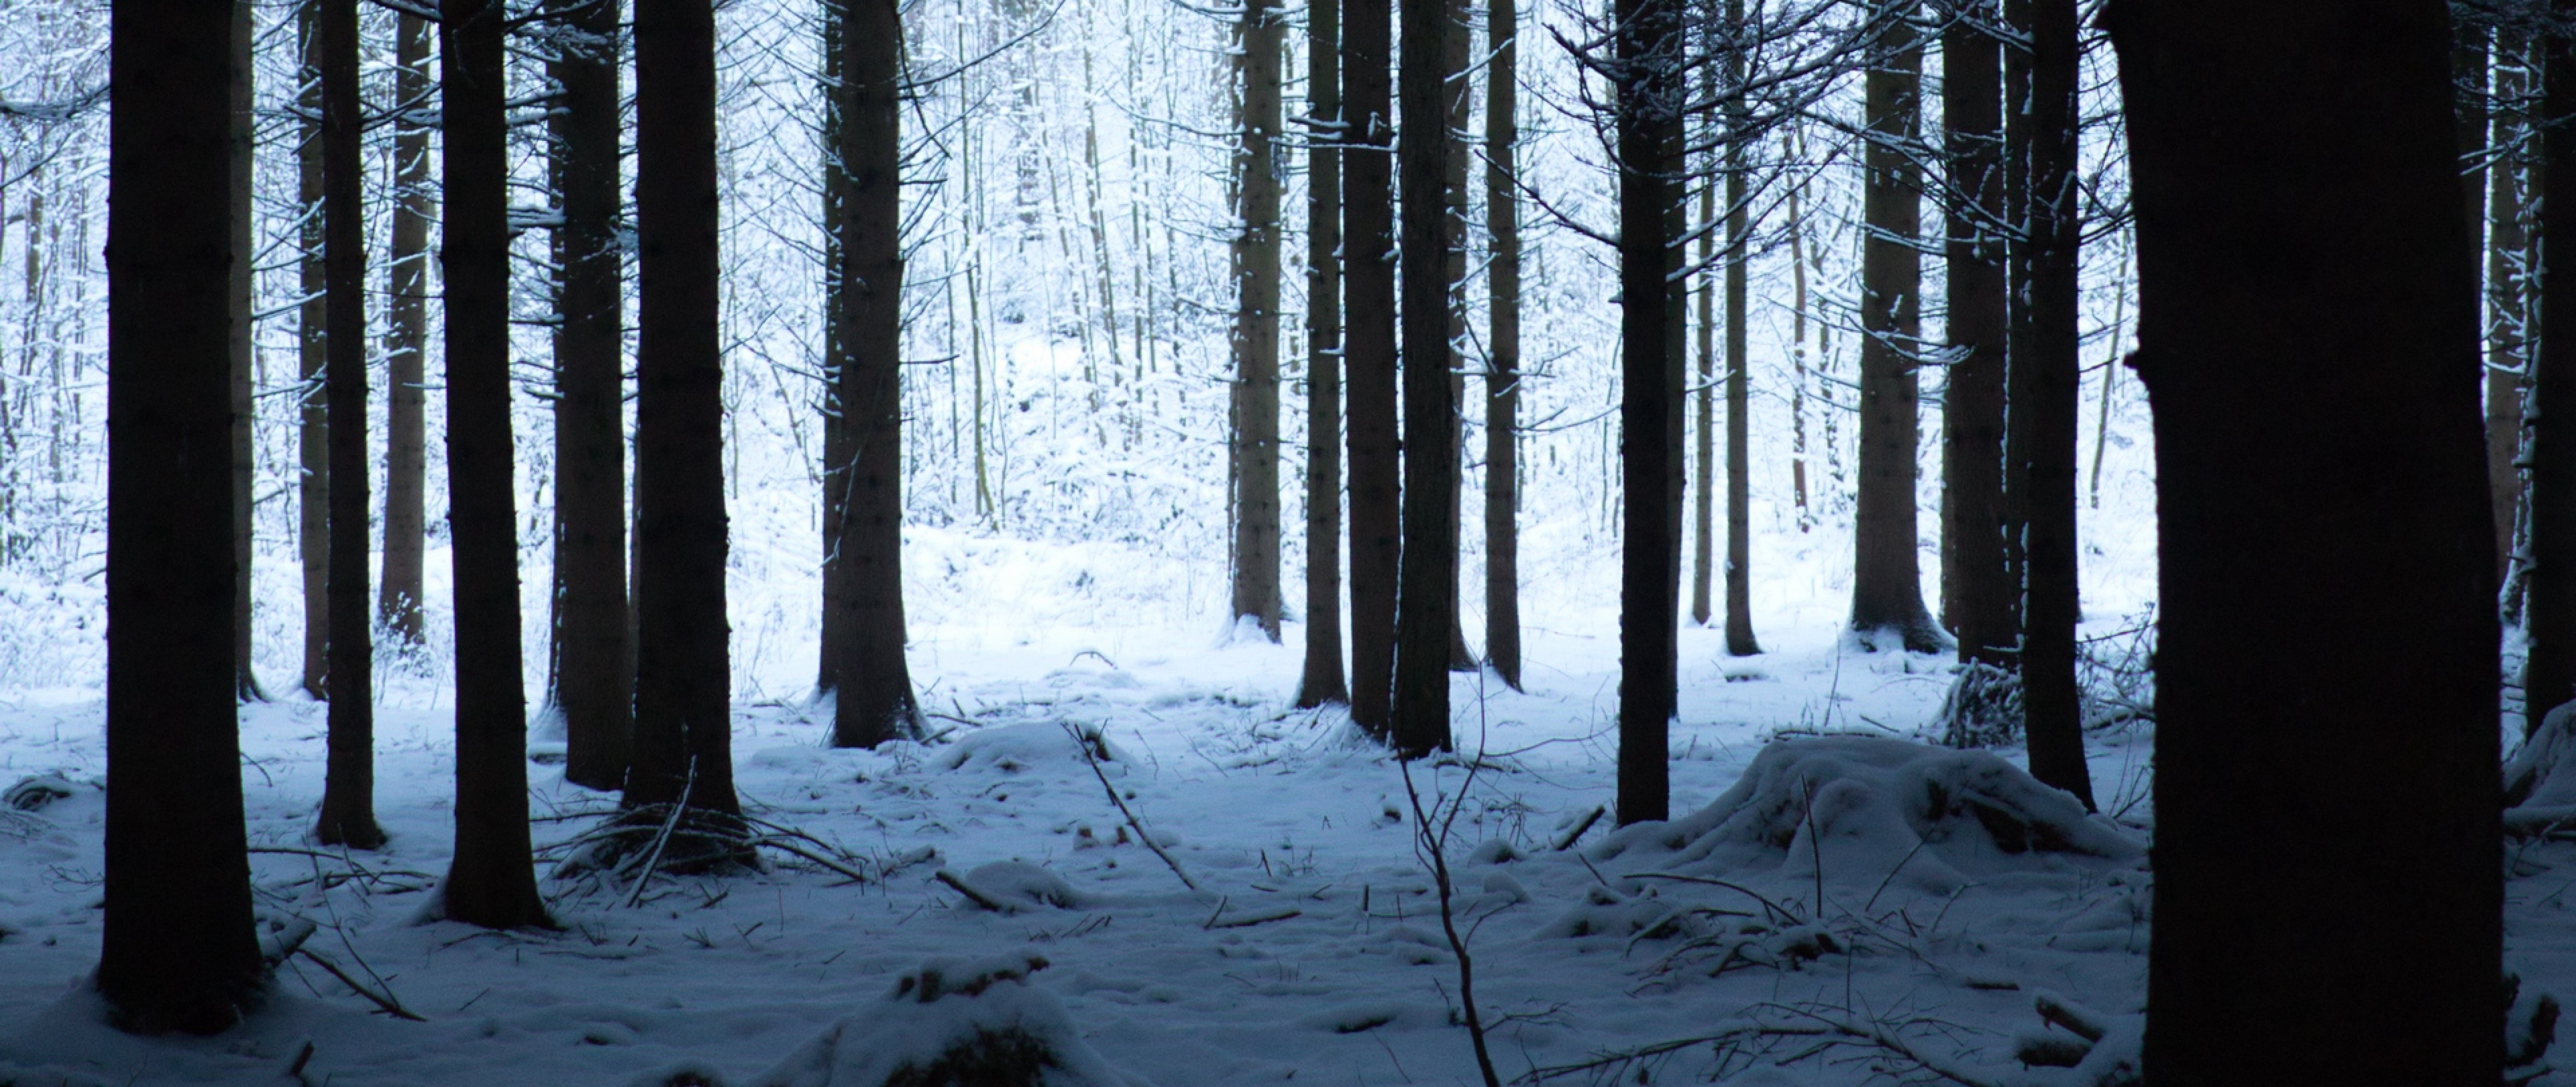 hike wallpaper love,tree,snow,winter,forest,natural environment